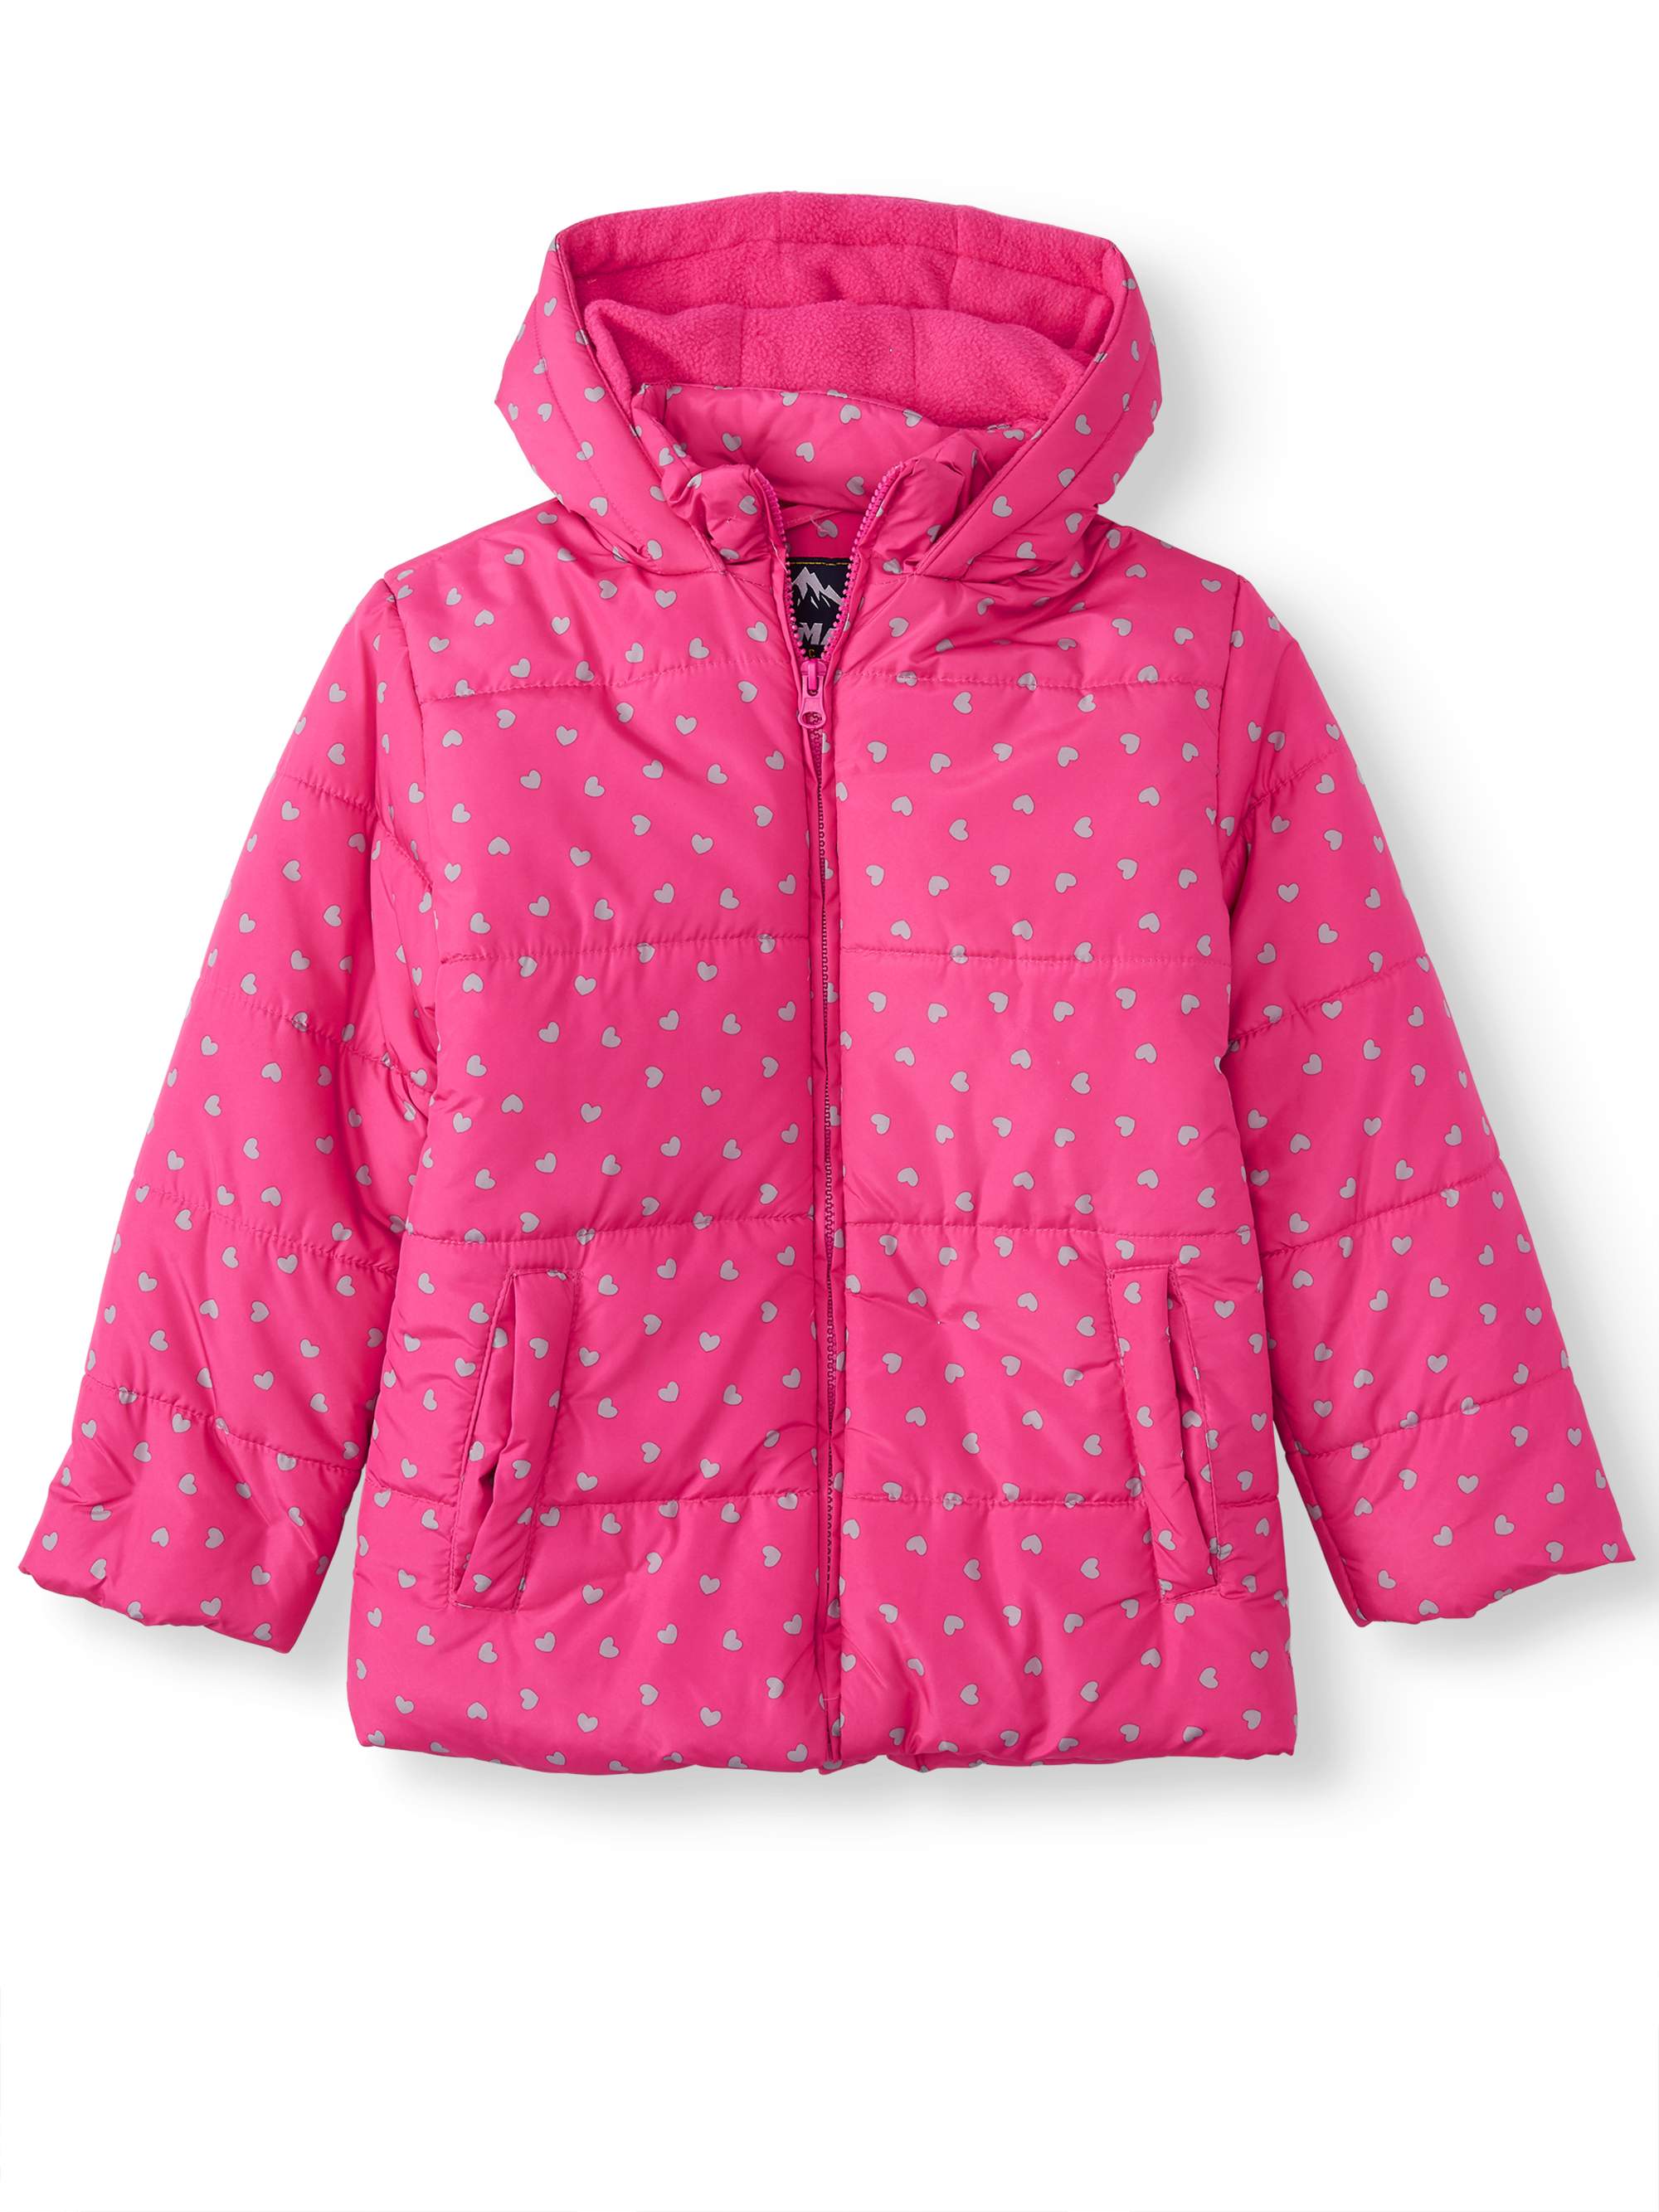 Climate Concepts Heart Print Bubble Jacket (Little Girls & Big Girls) - image 1 of 2